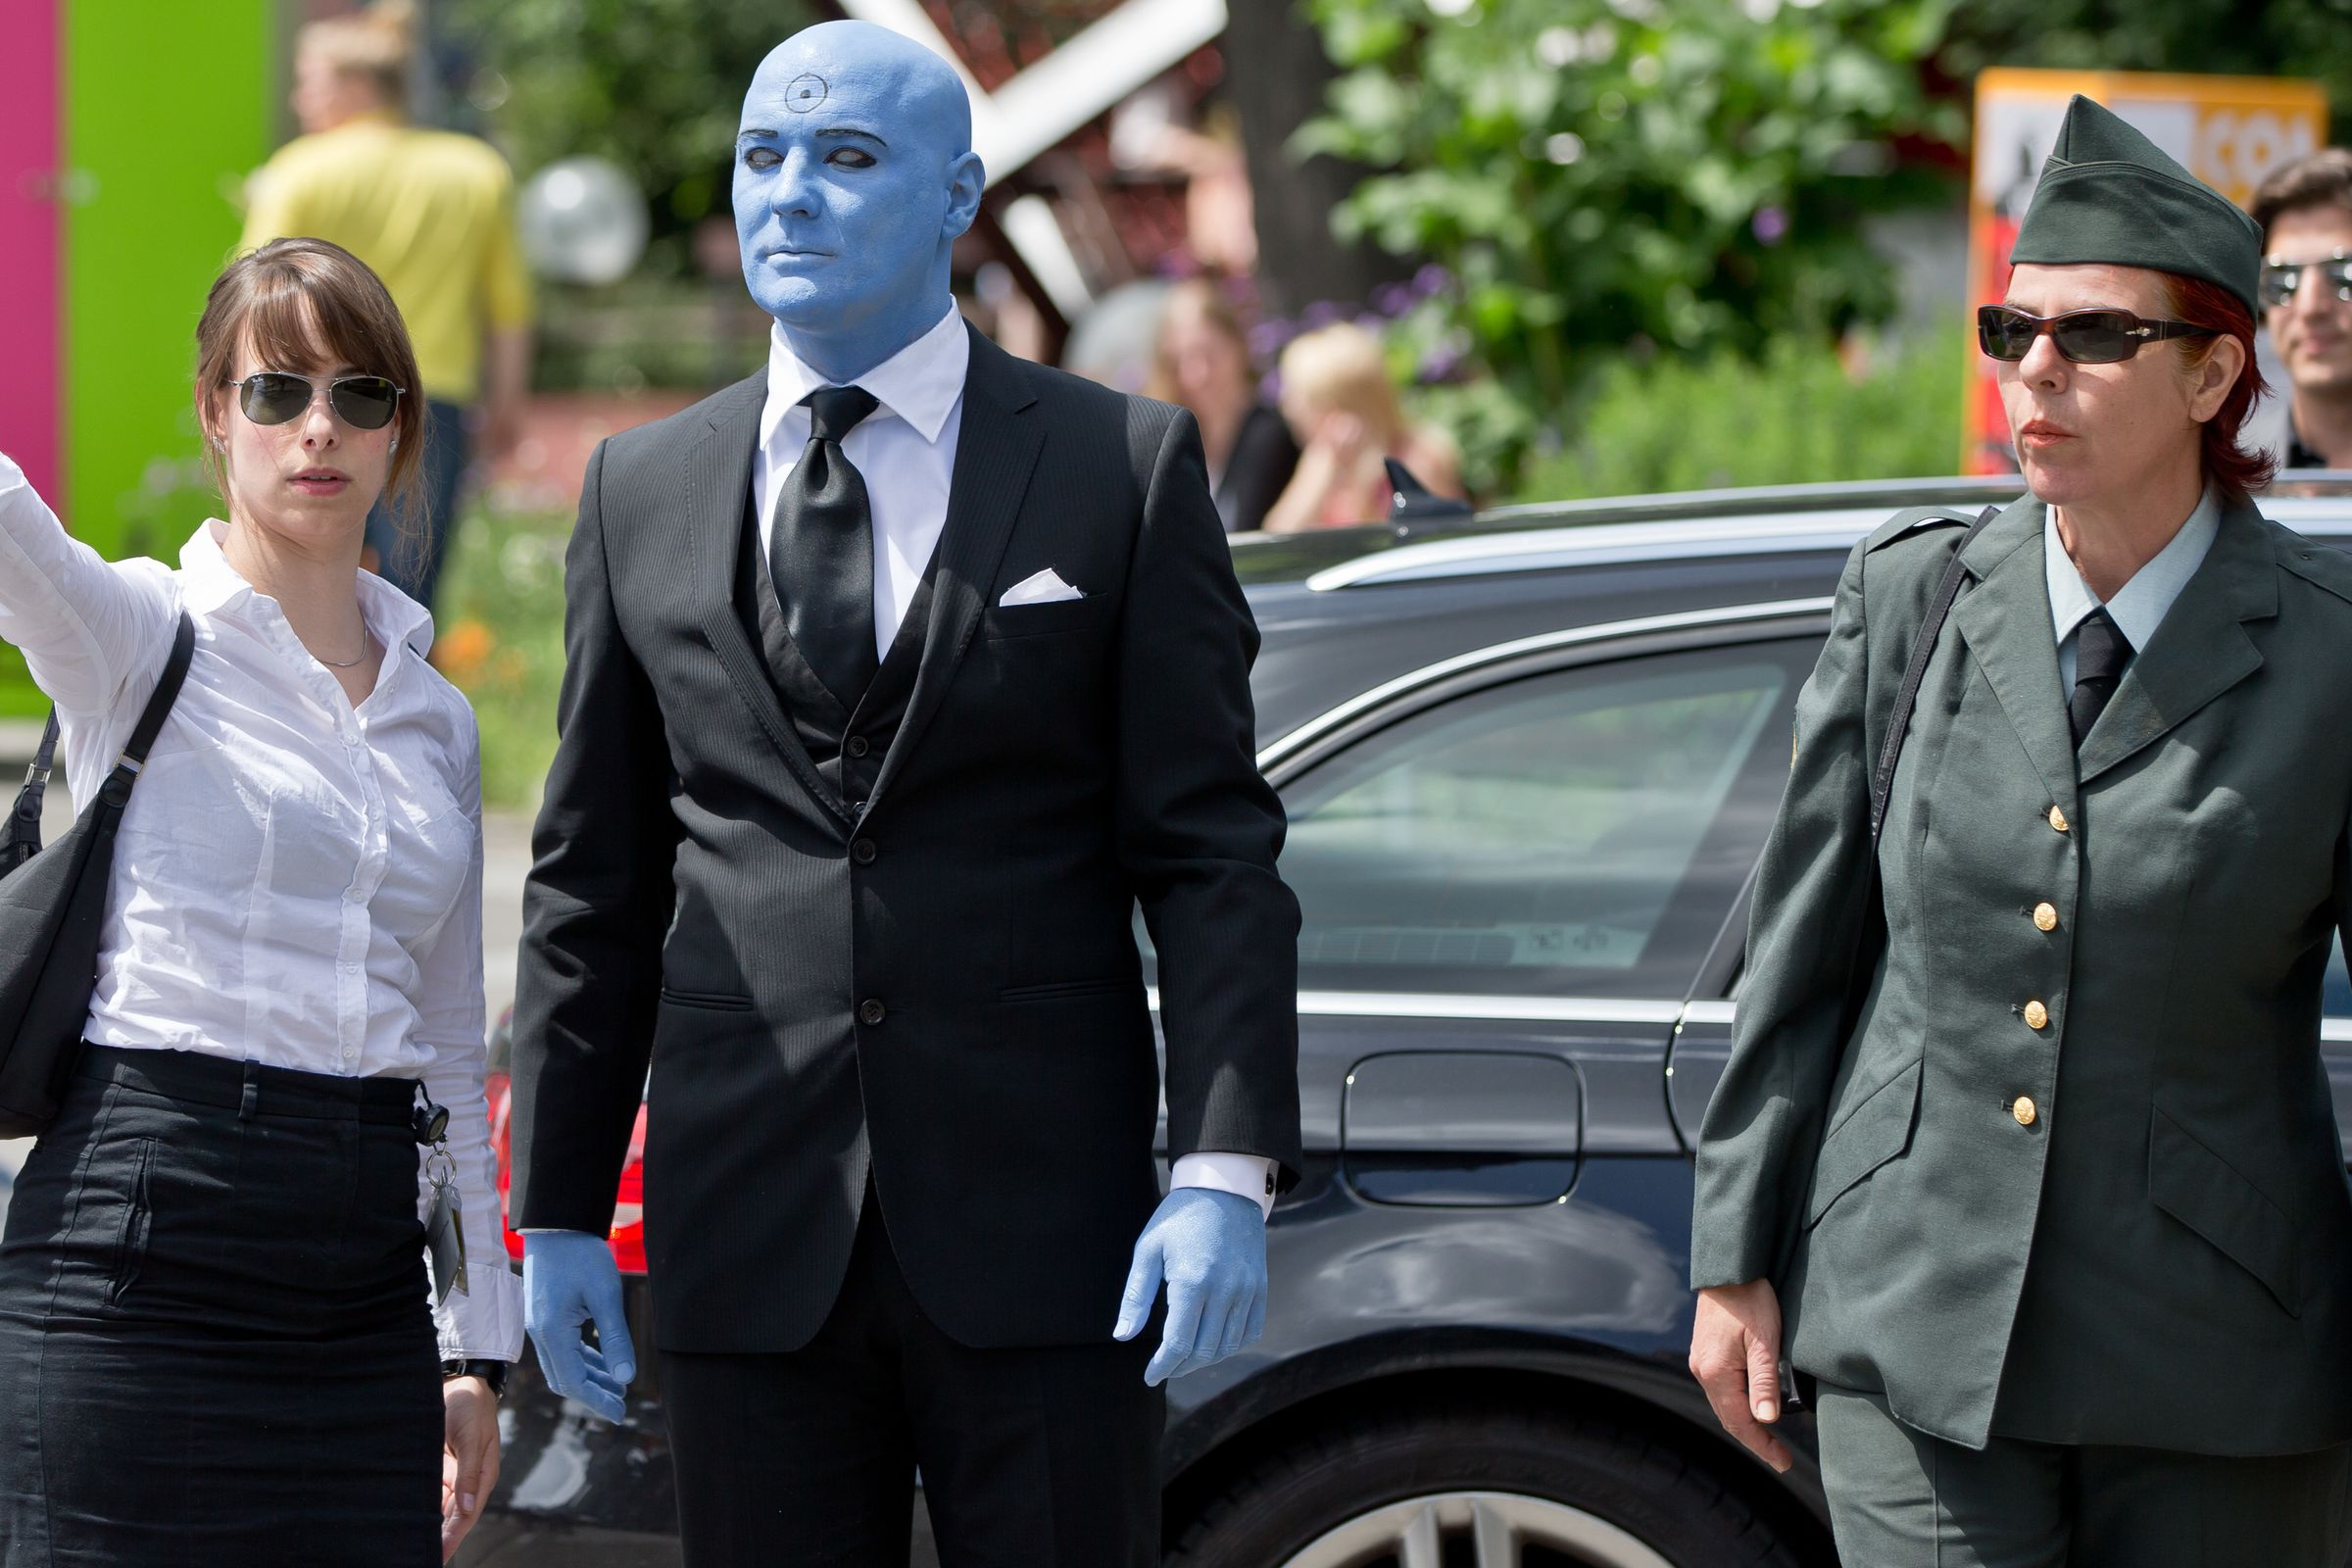 A man costumed as ‘Dr. Manhattan’ of the comic ‘Watchmen’ arrives at the International Comic Salon, accompanied by ‘military escort’ in Erlangen, Germany, 19 June 2014.&nbsp;